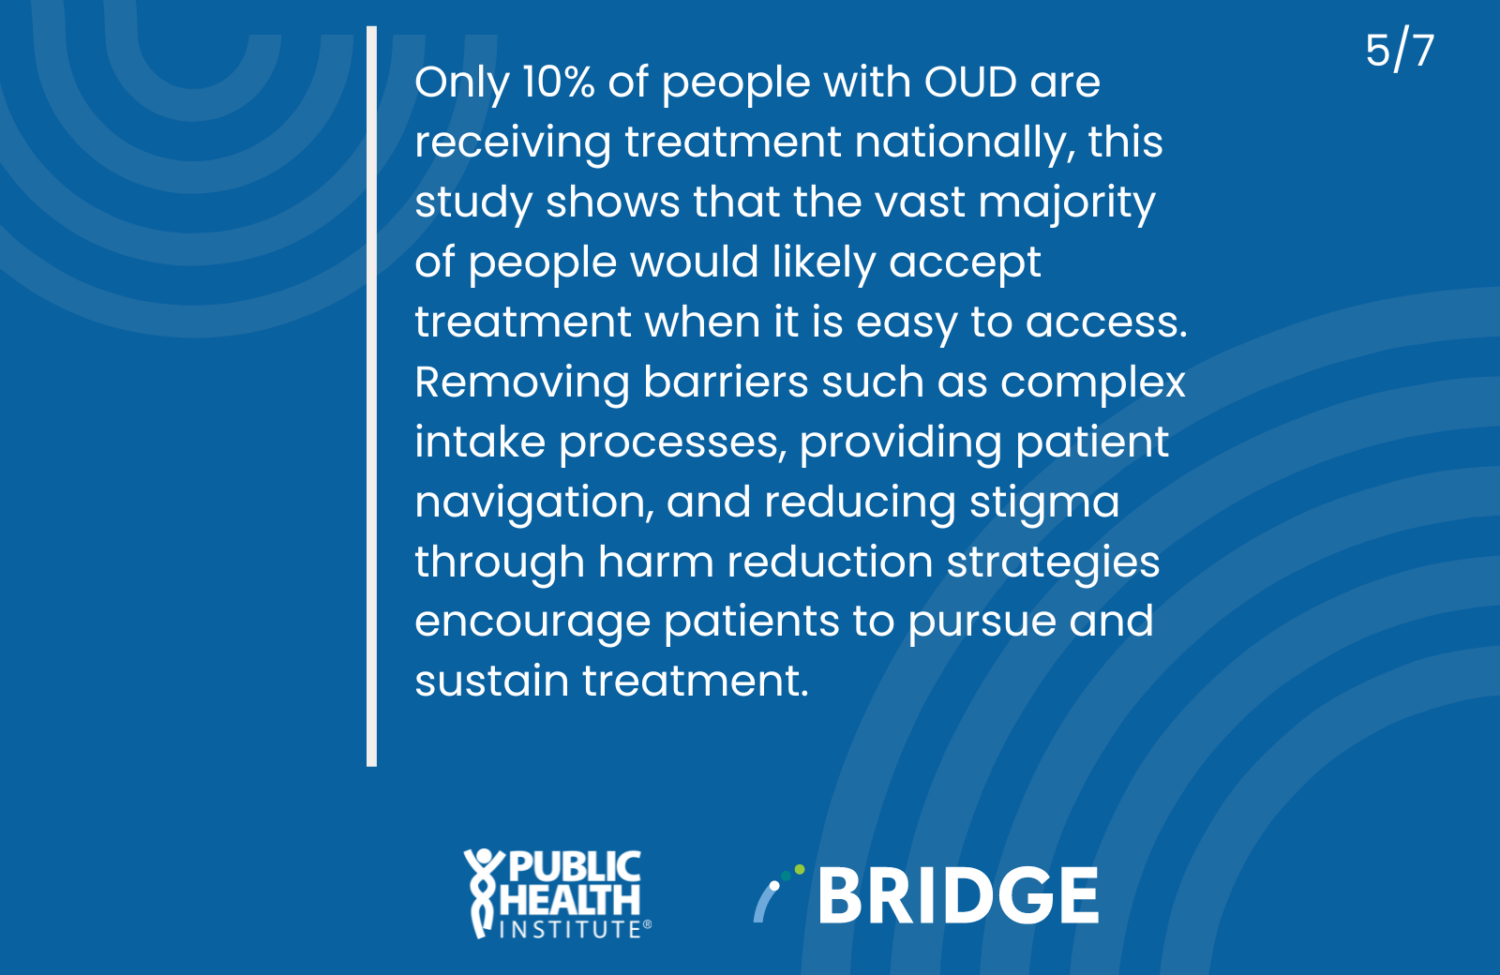 Only 10% of people with OUD are receiving treatment nationally, this study shows that the vast majority of people would likely accept treatment when it is easy to access. Removing barriers such as complex intake processes, providing patient navigation, and reducing stigma through harm reduction strategies encourage patients to pursue and sustain treatment.